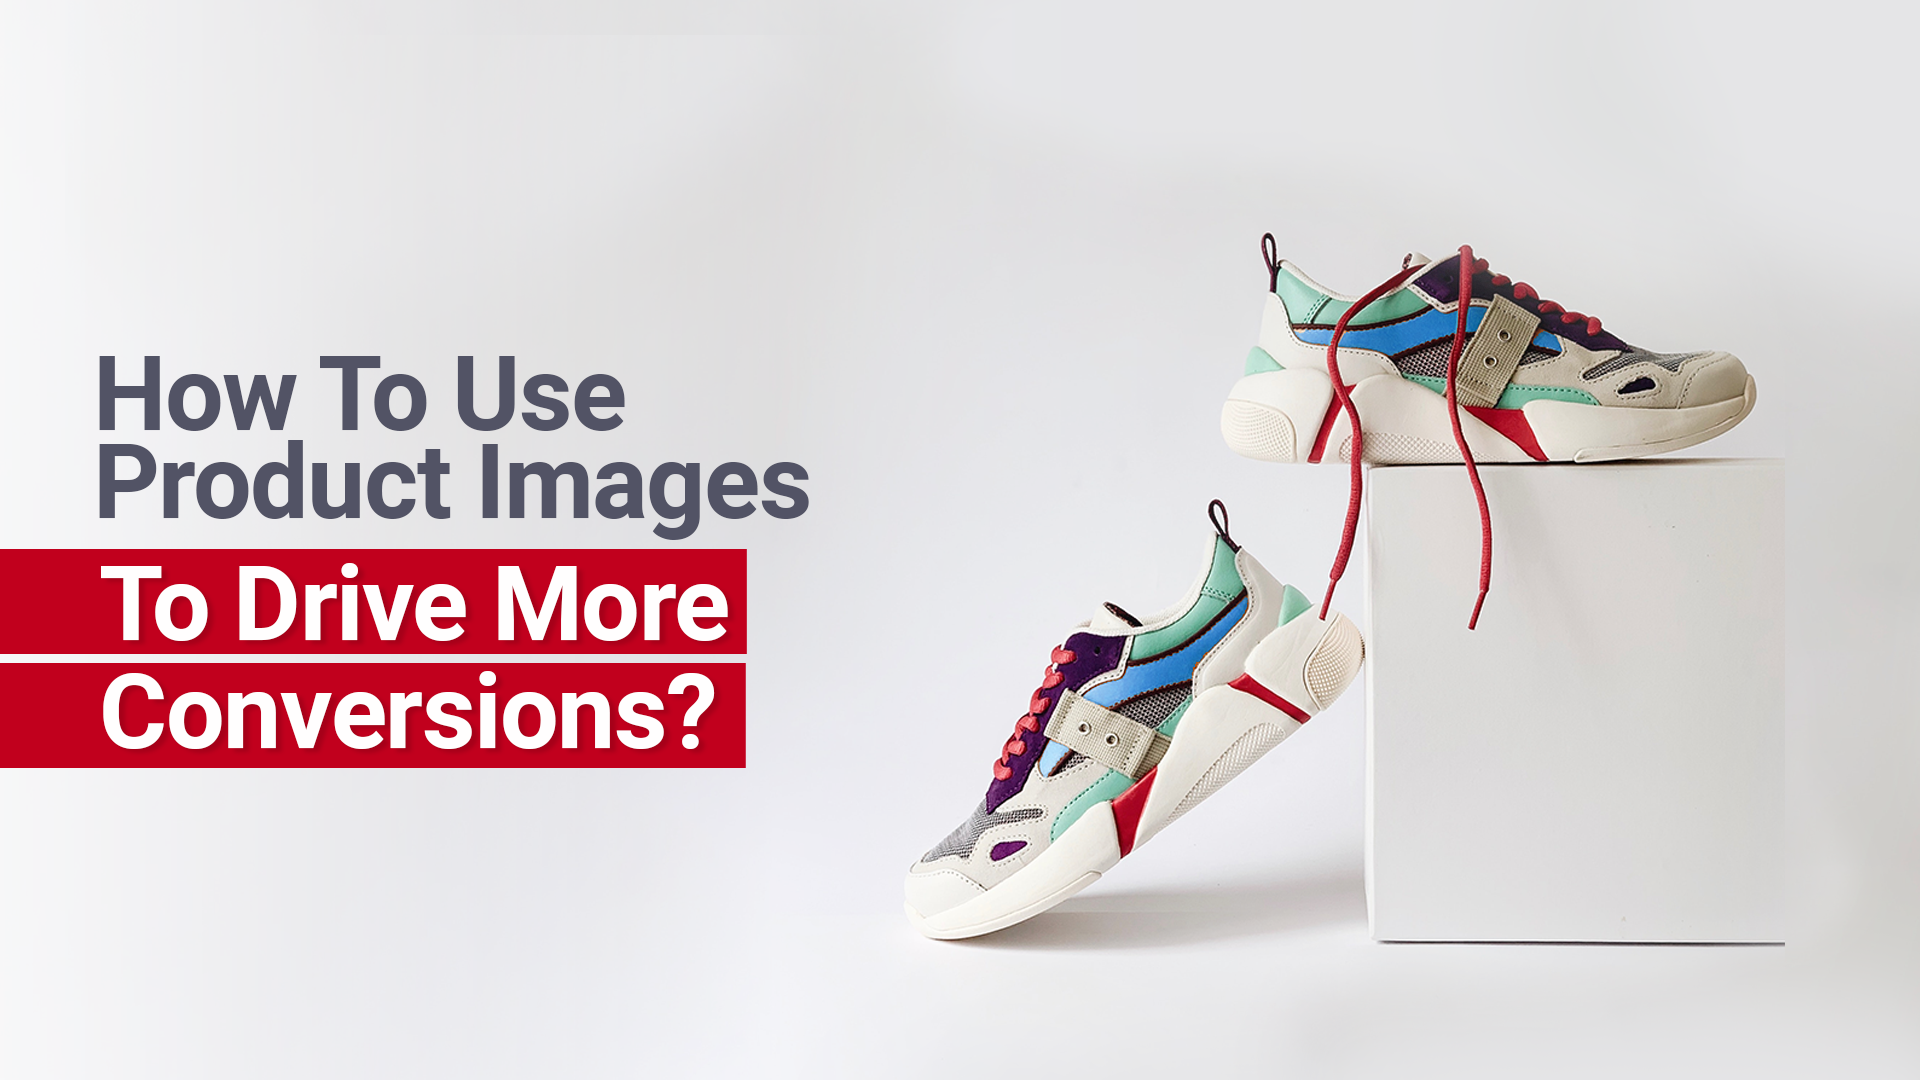 How To Use Product Images To Drive More Conversions